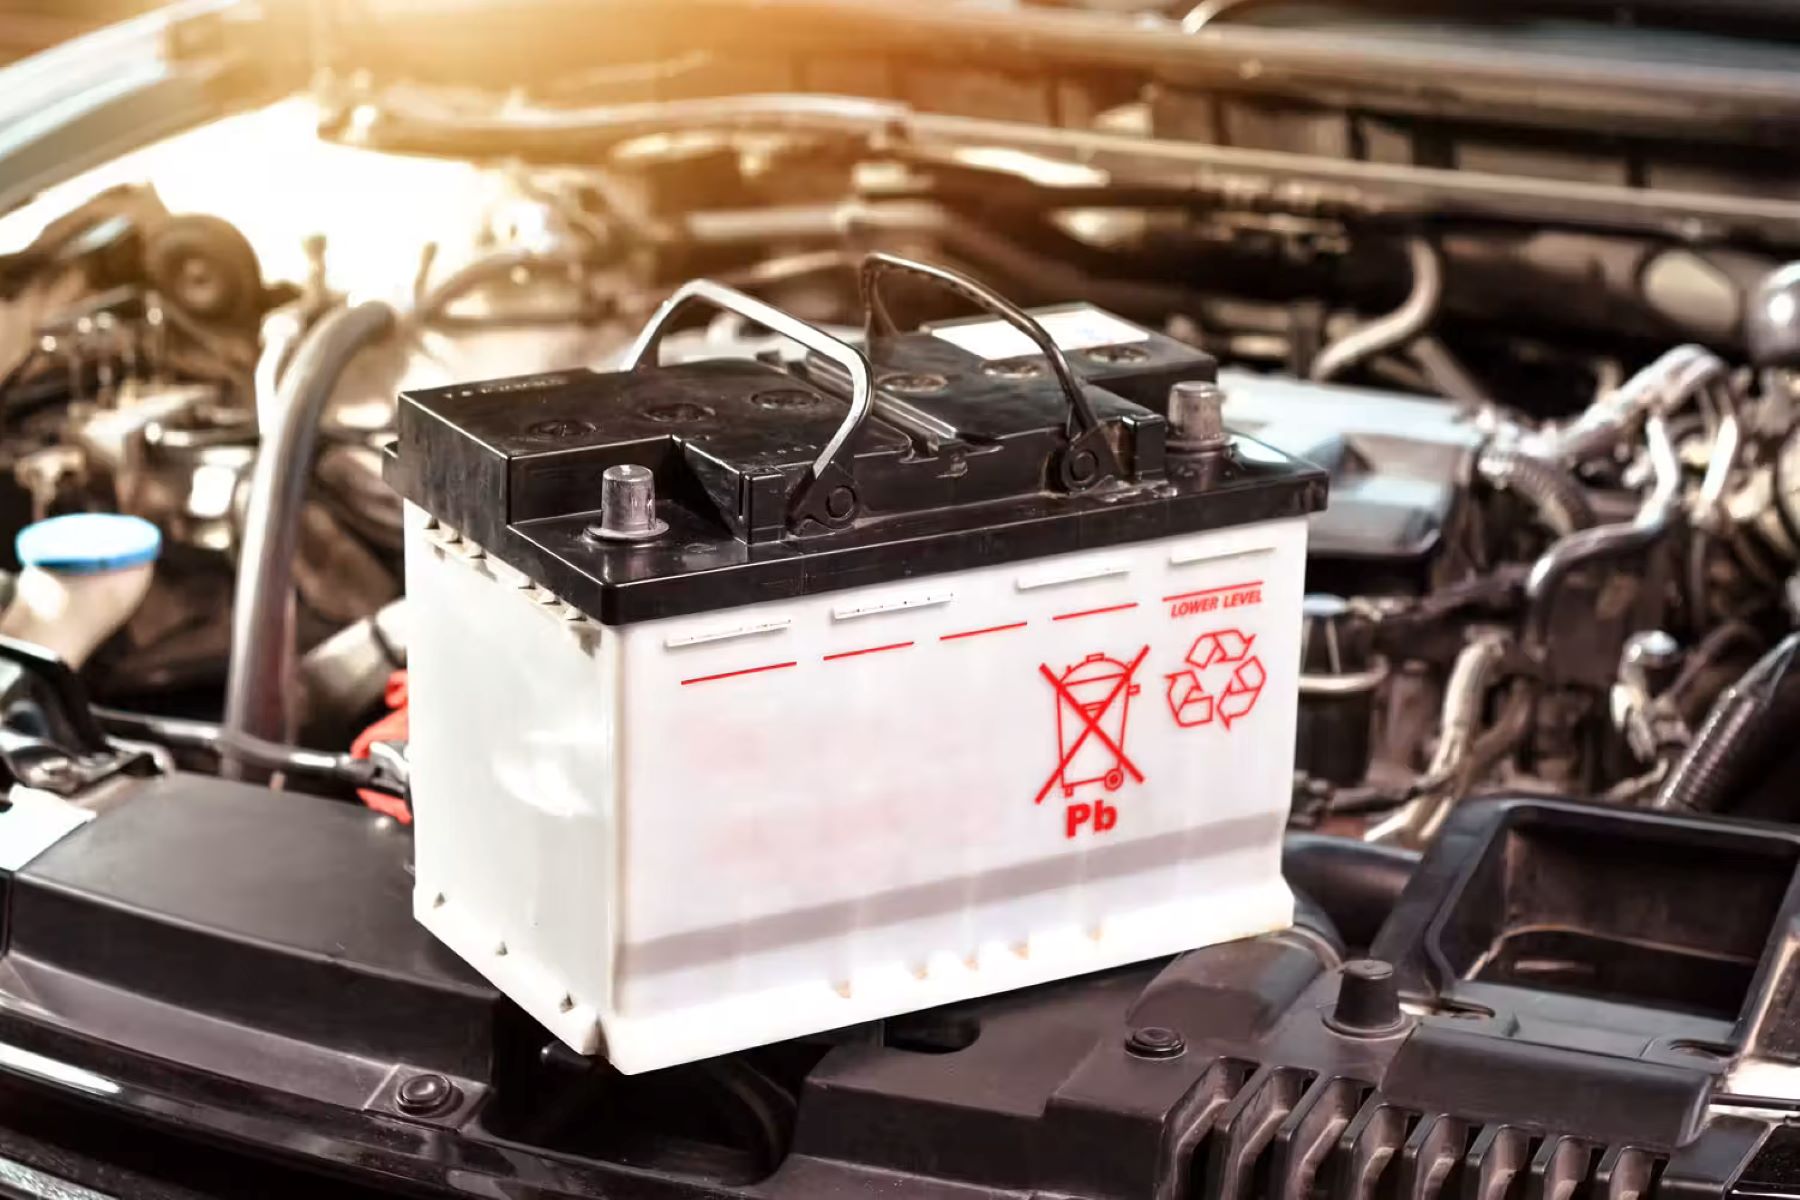 Get Cash Back For Your Old Car Battery - Return Any Battery For A Refund!